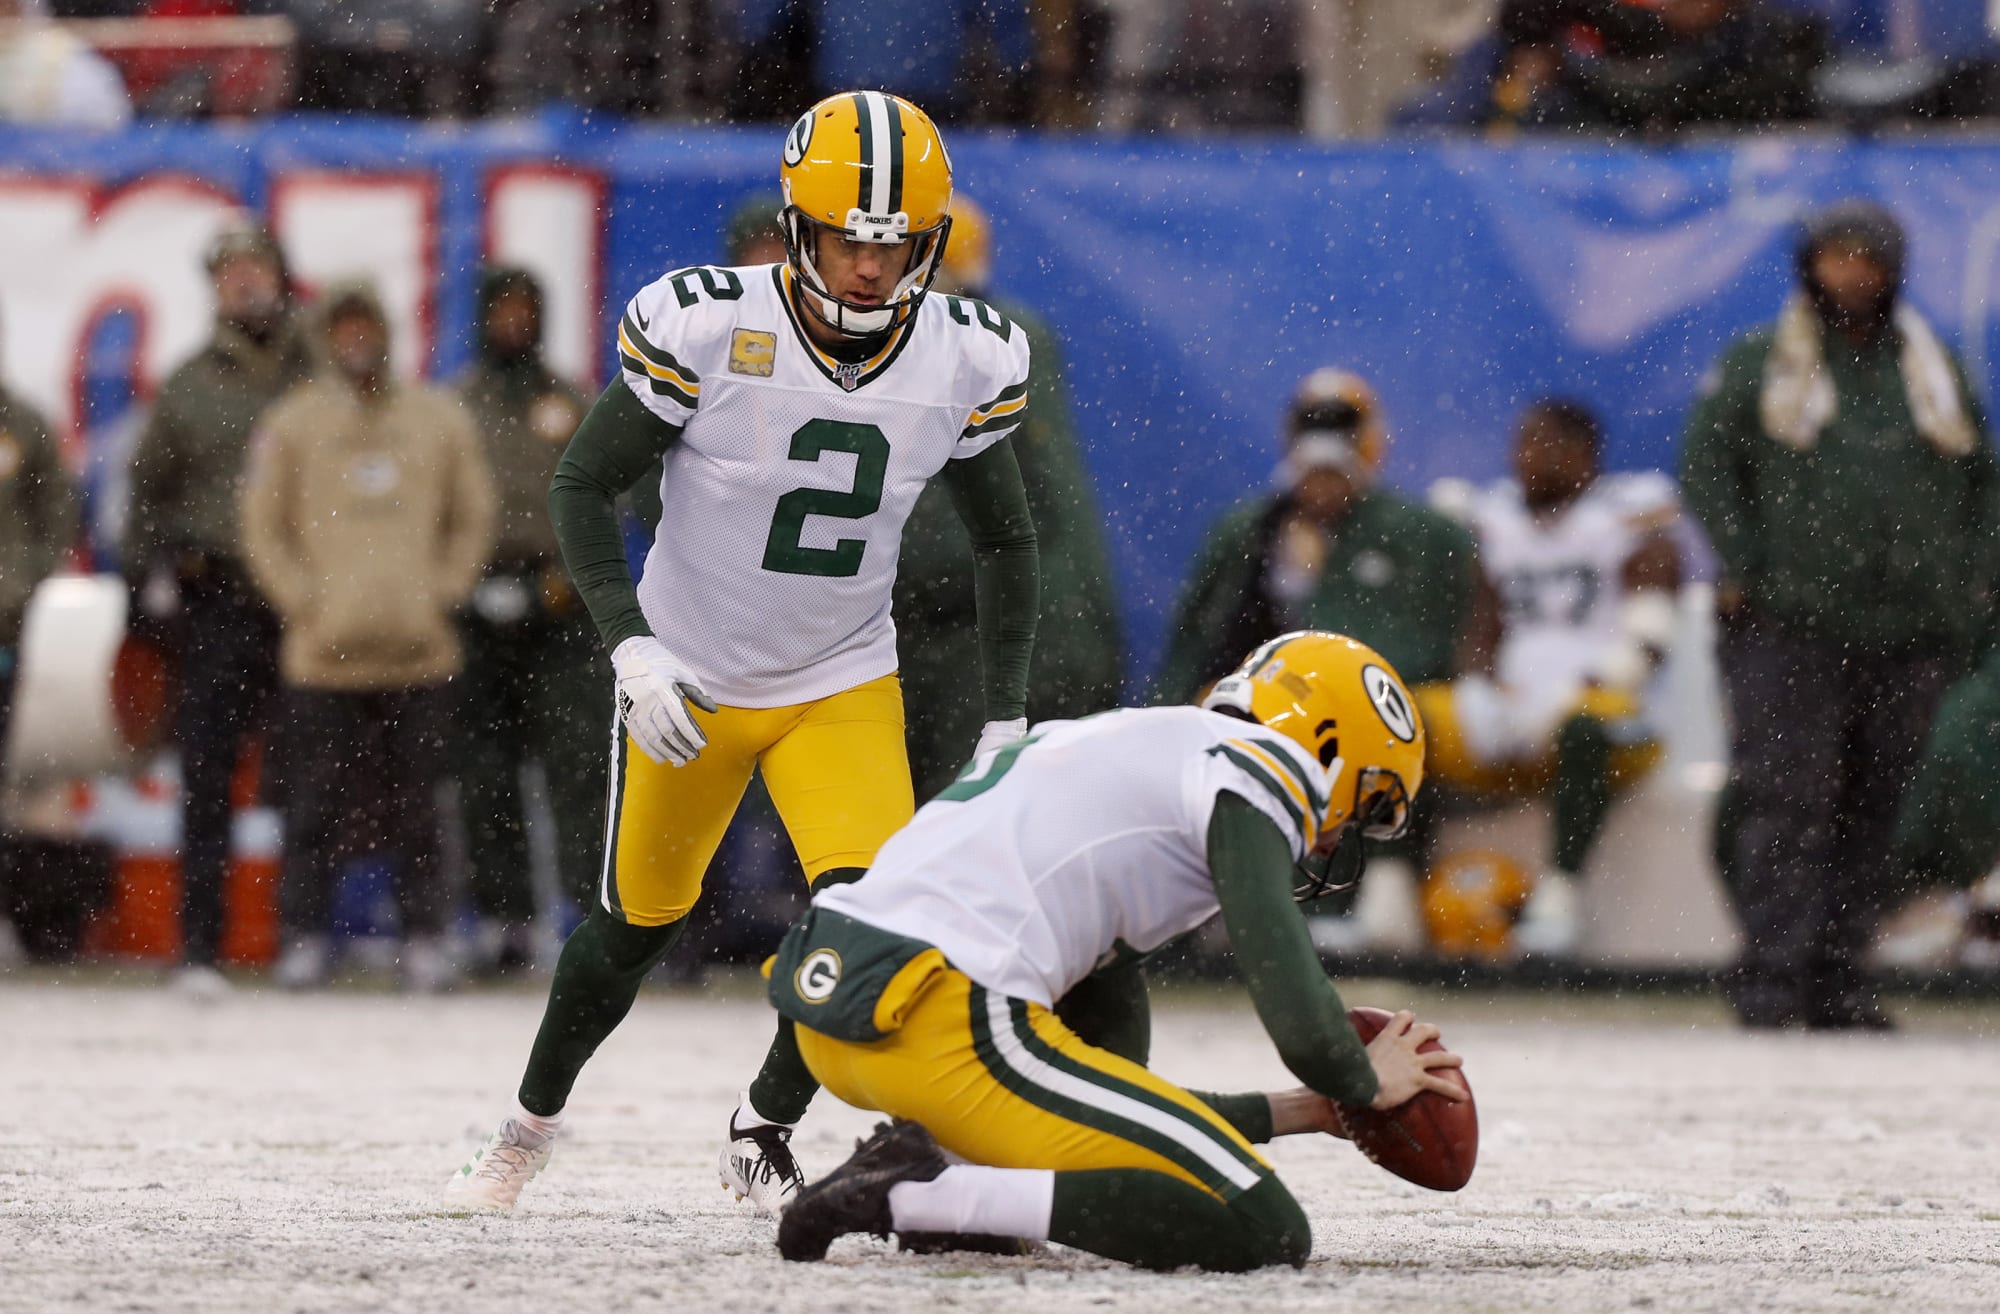 Packers: Mason Crosby Continues to Provide Stability at Kicker